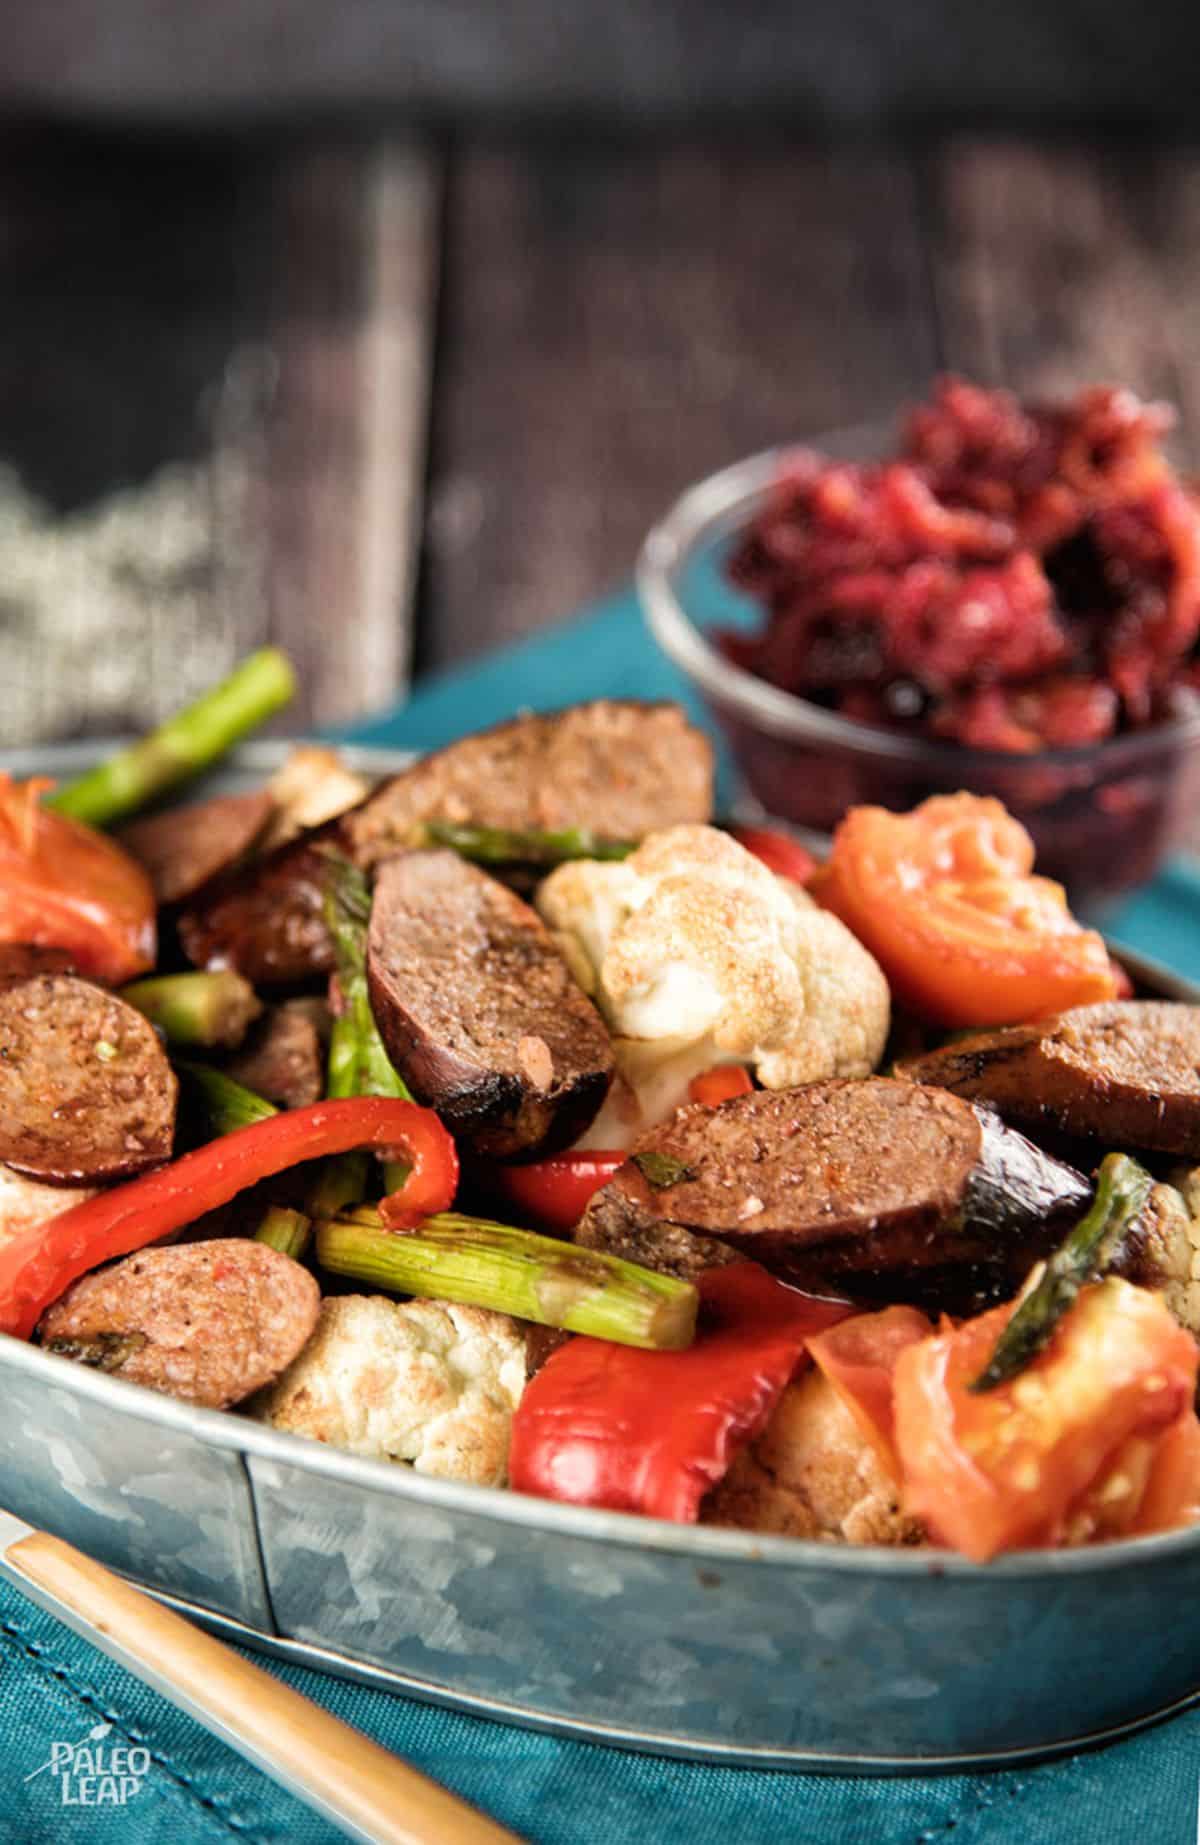 Sausage With Grilled Vegetables